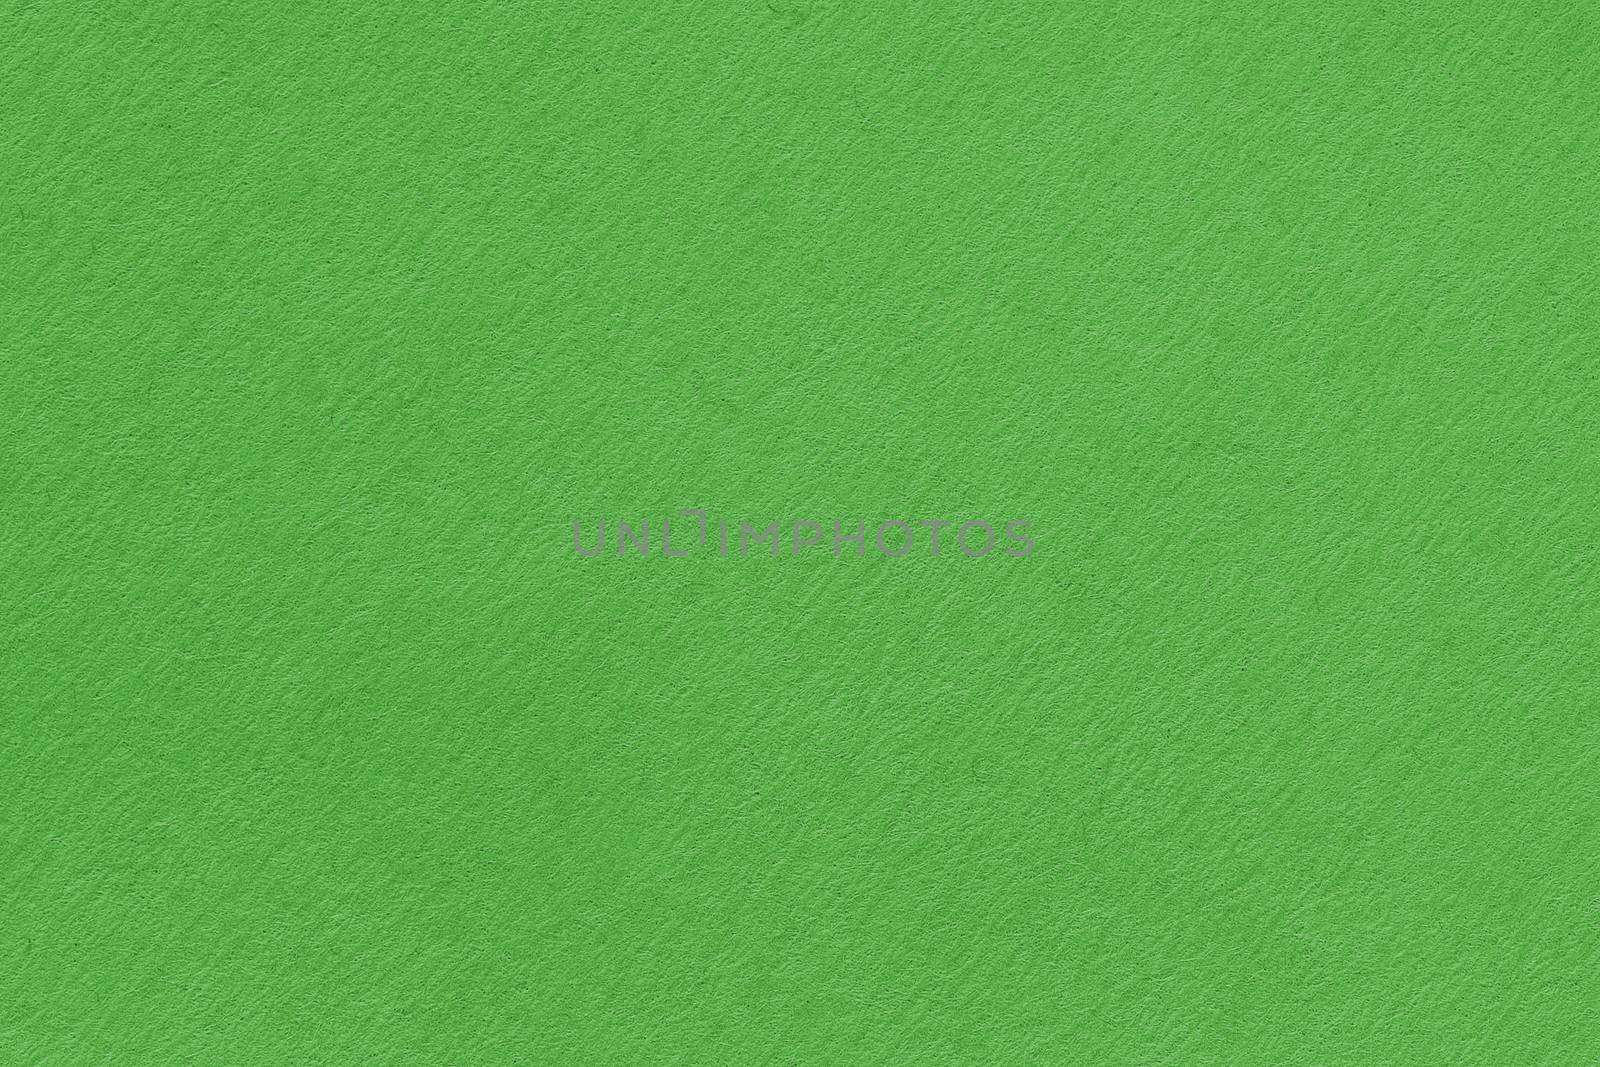 Green washed paper texture background. Recycled paper texture. by ivo_13